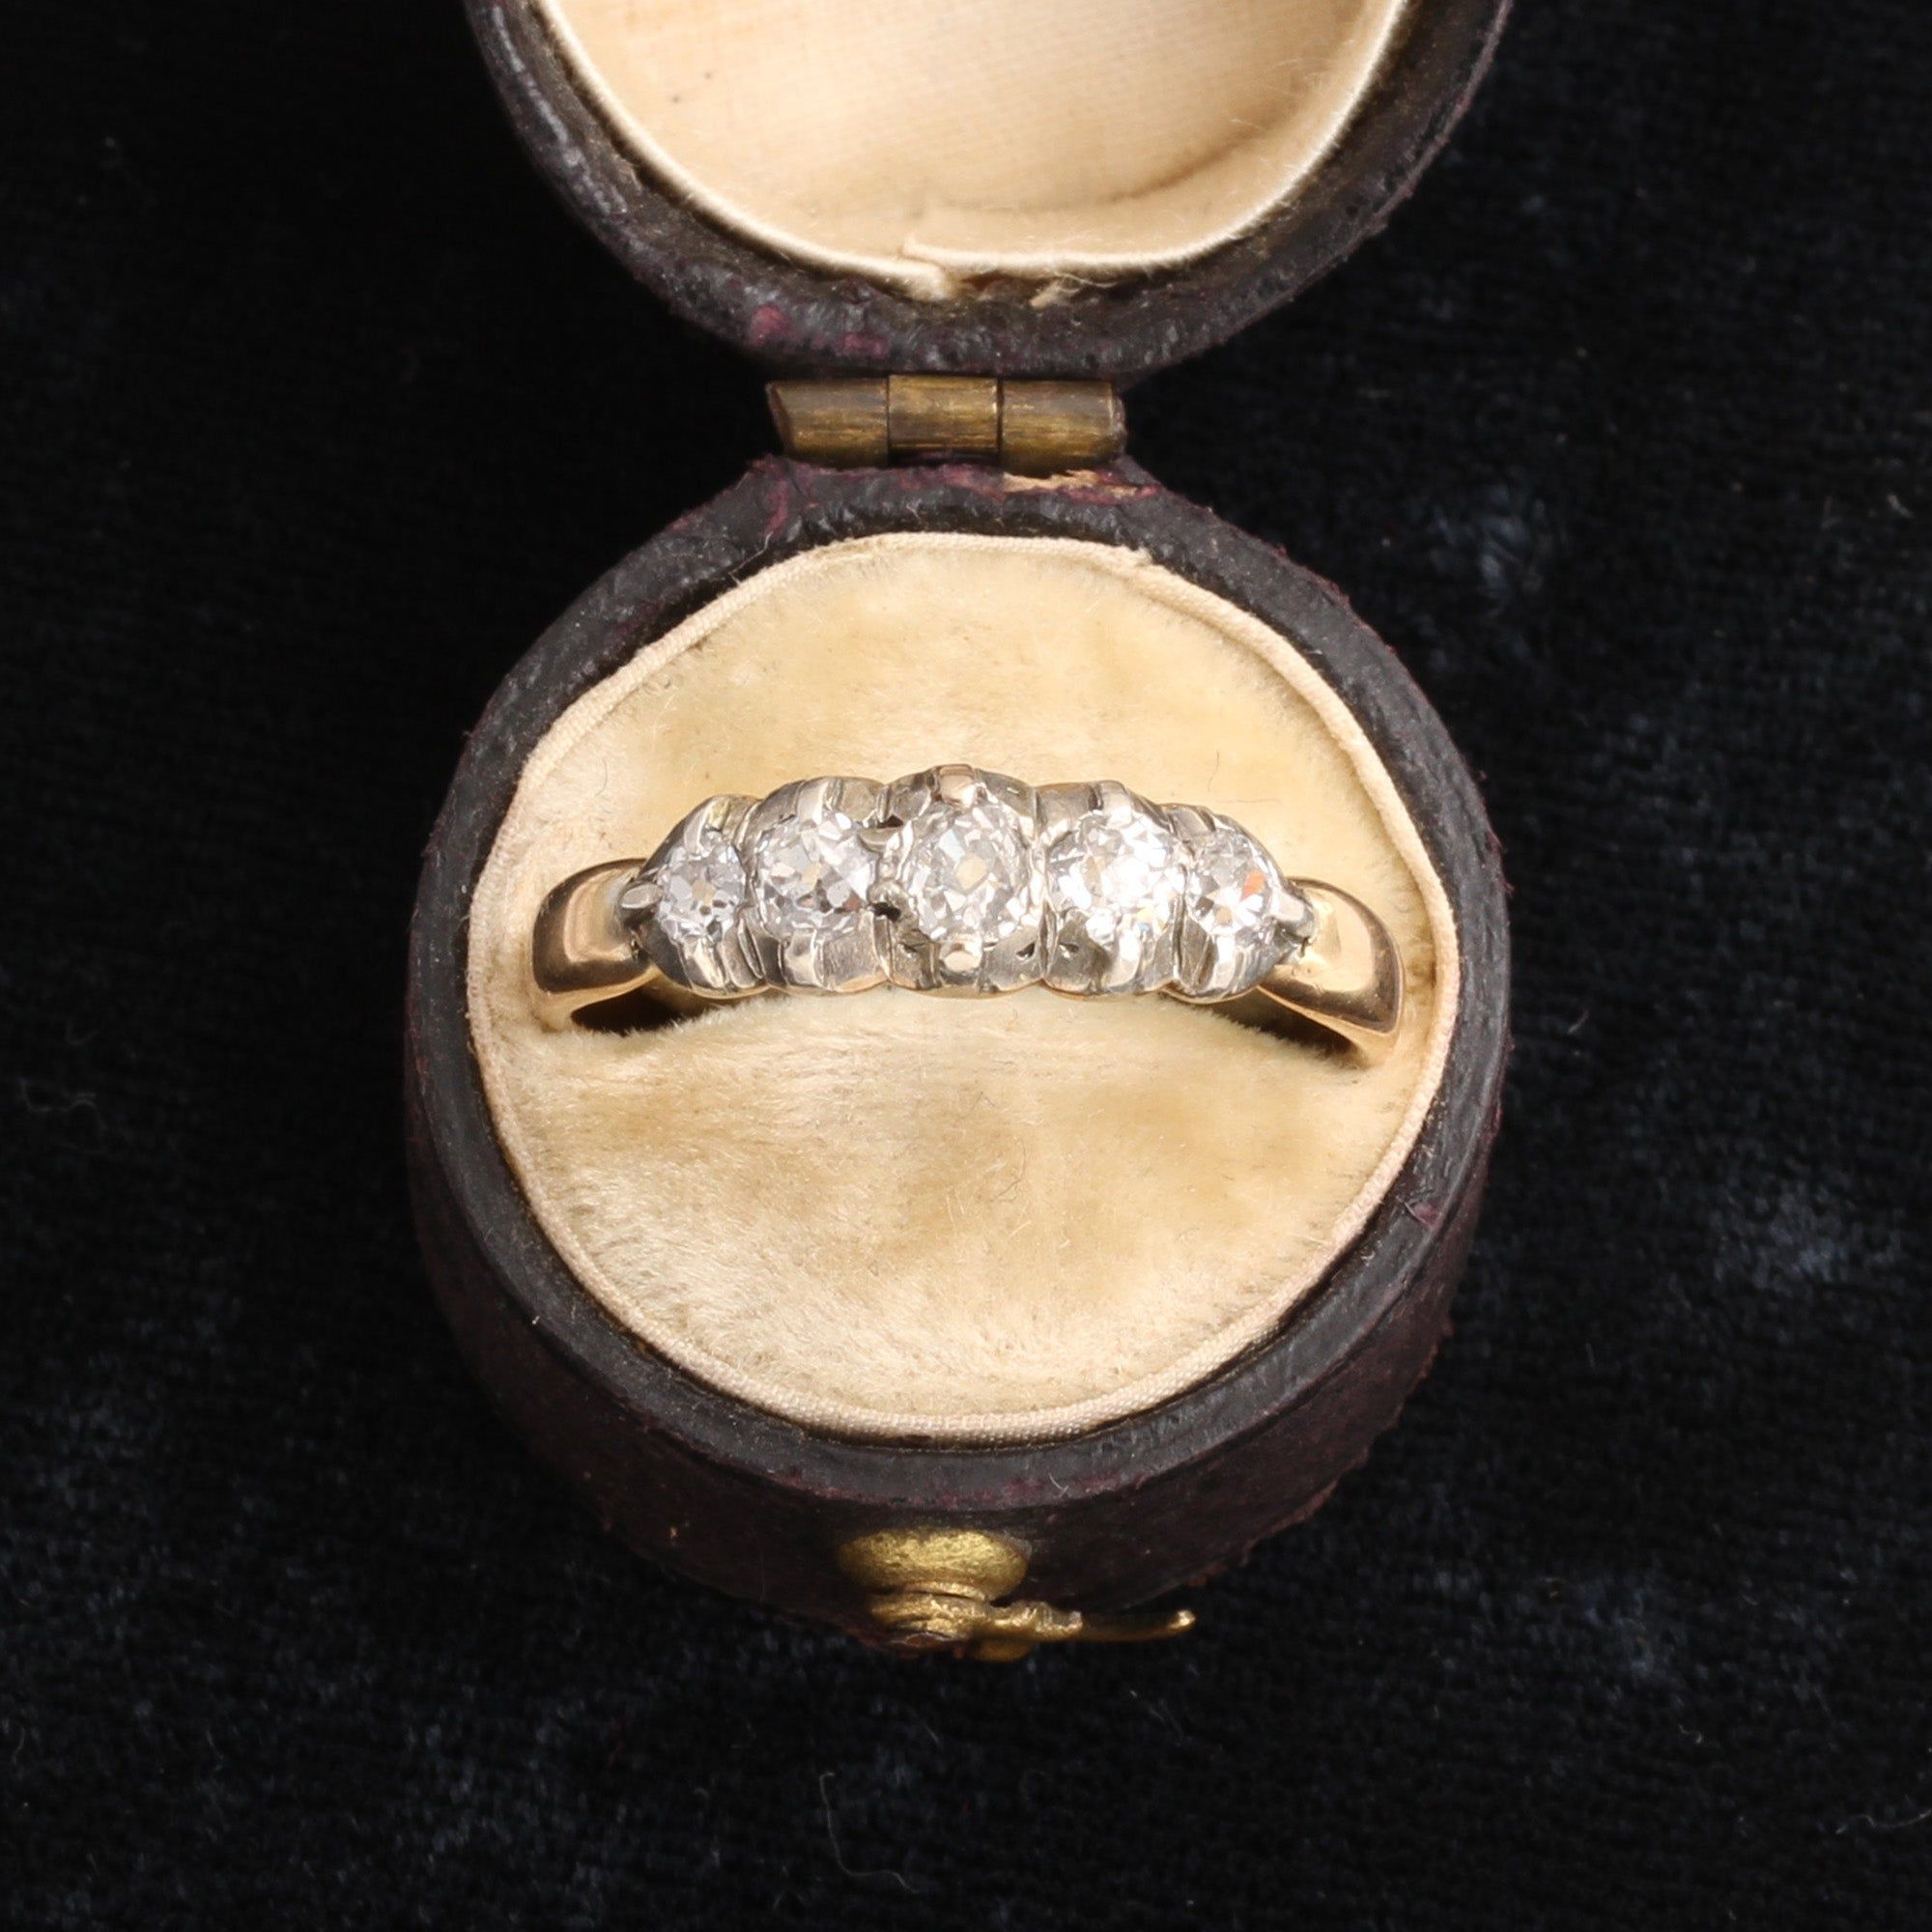 Detail of Early Victorian Five Diamond Ring